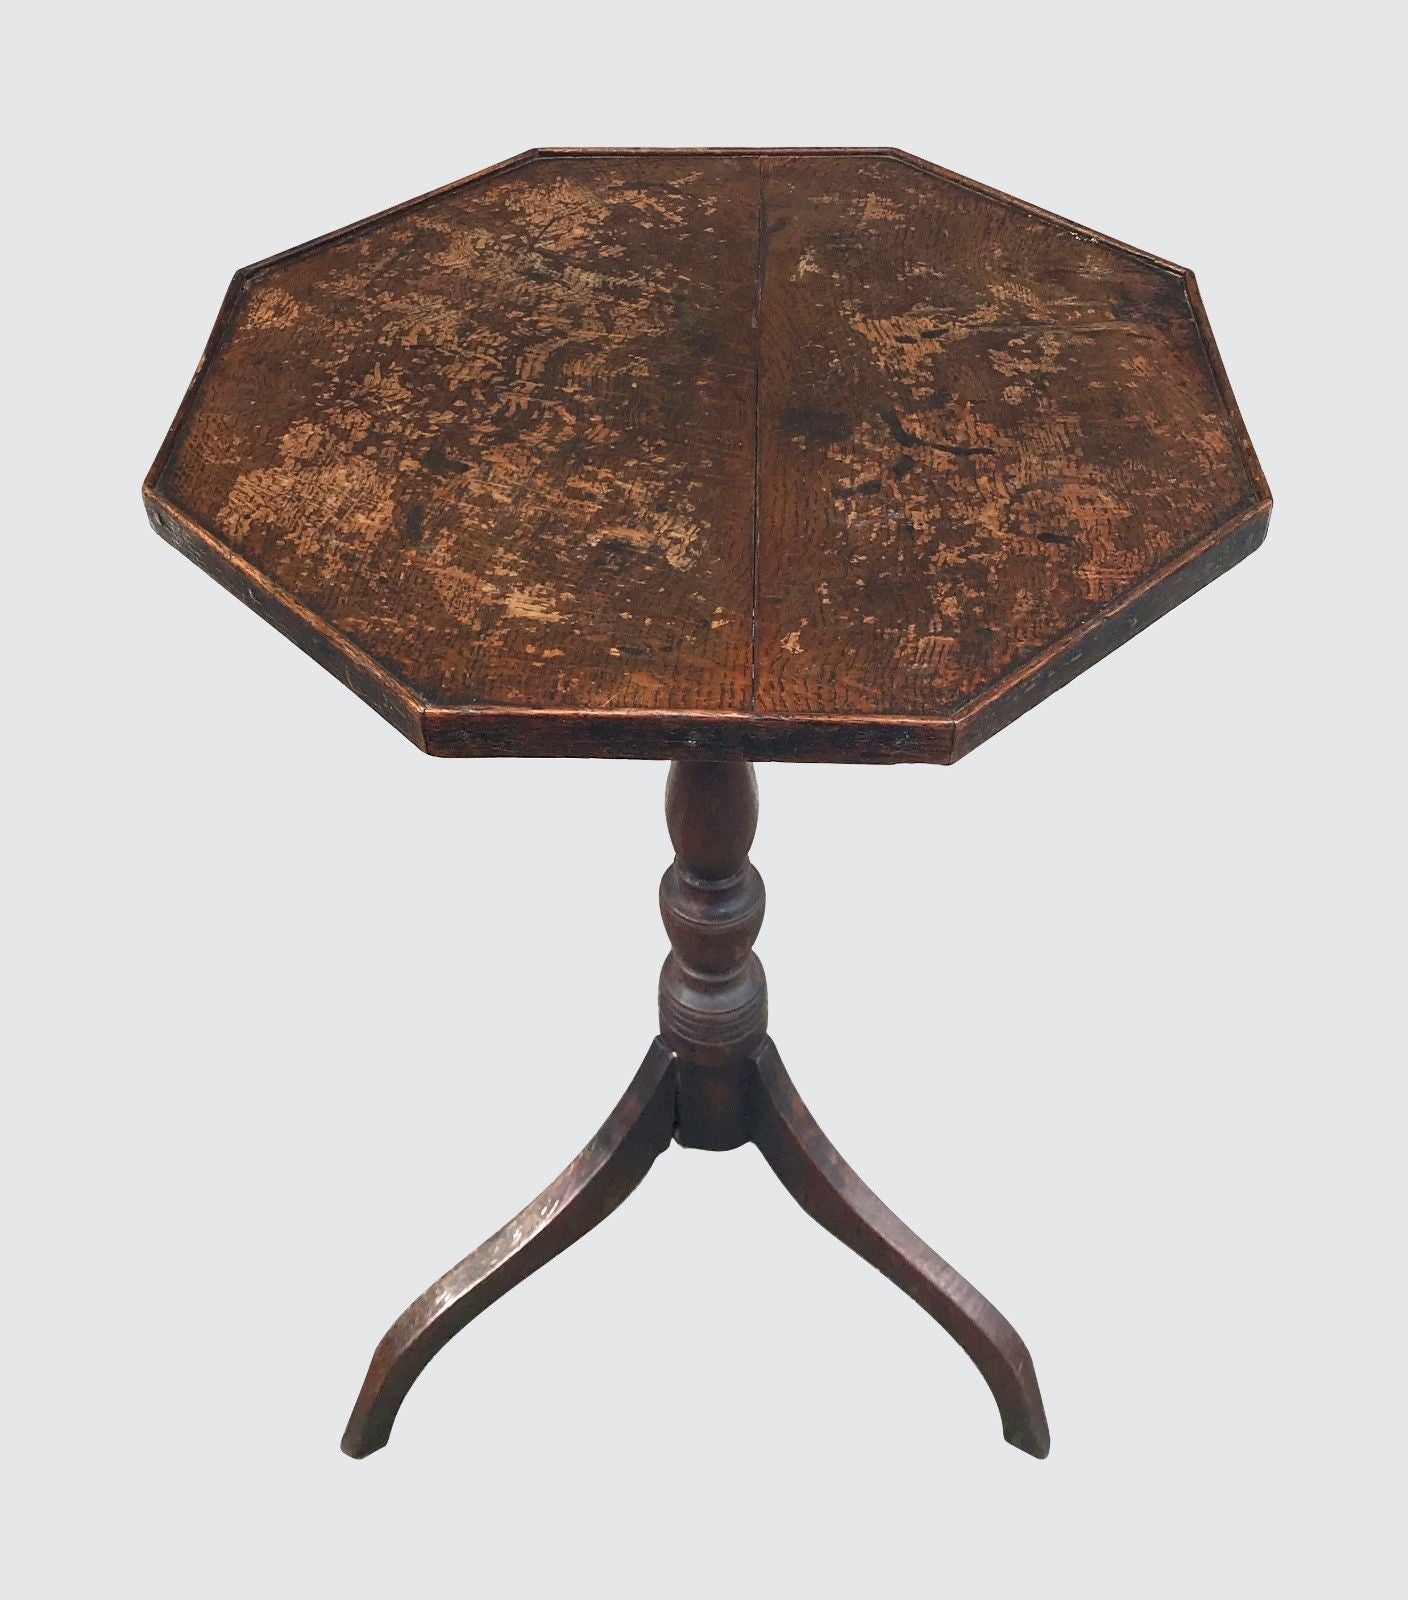 EARLY 19TH C GEORGE III OCTAGONAL YEW WOOD CANDLE STAND IN ORIGINAL SURFACE